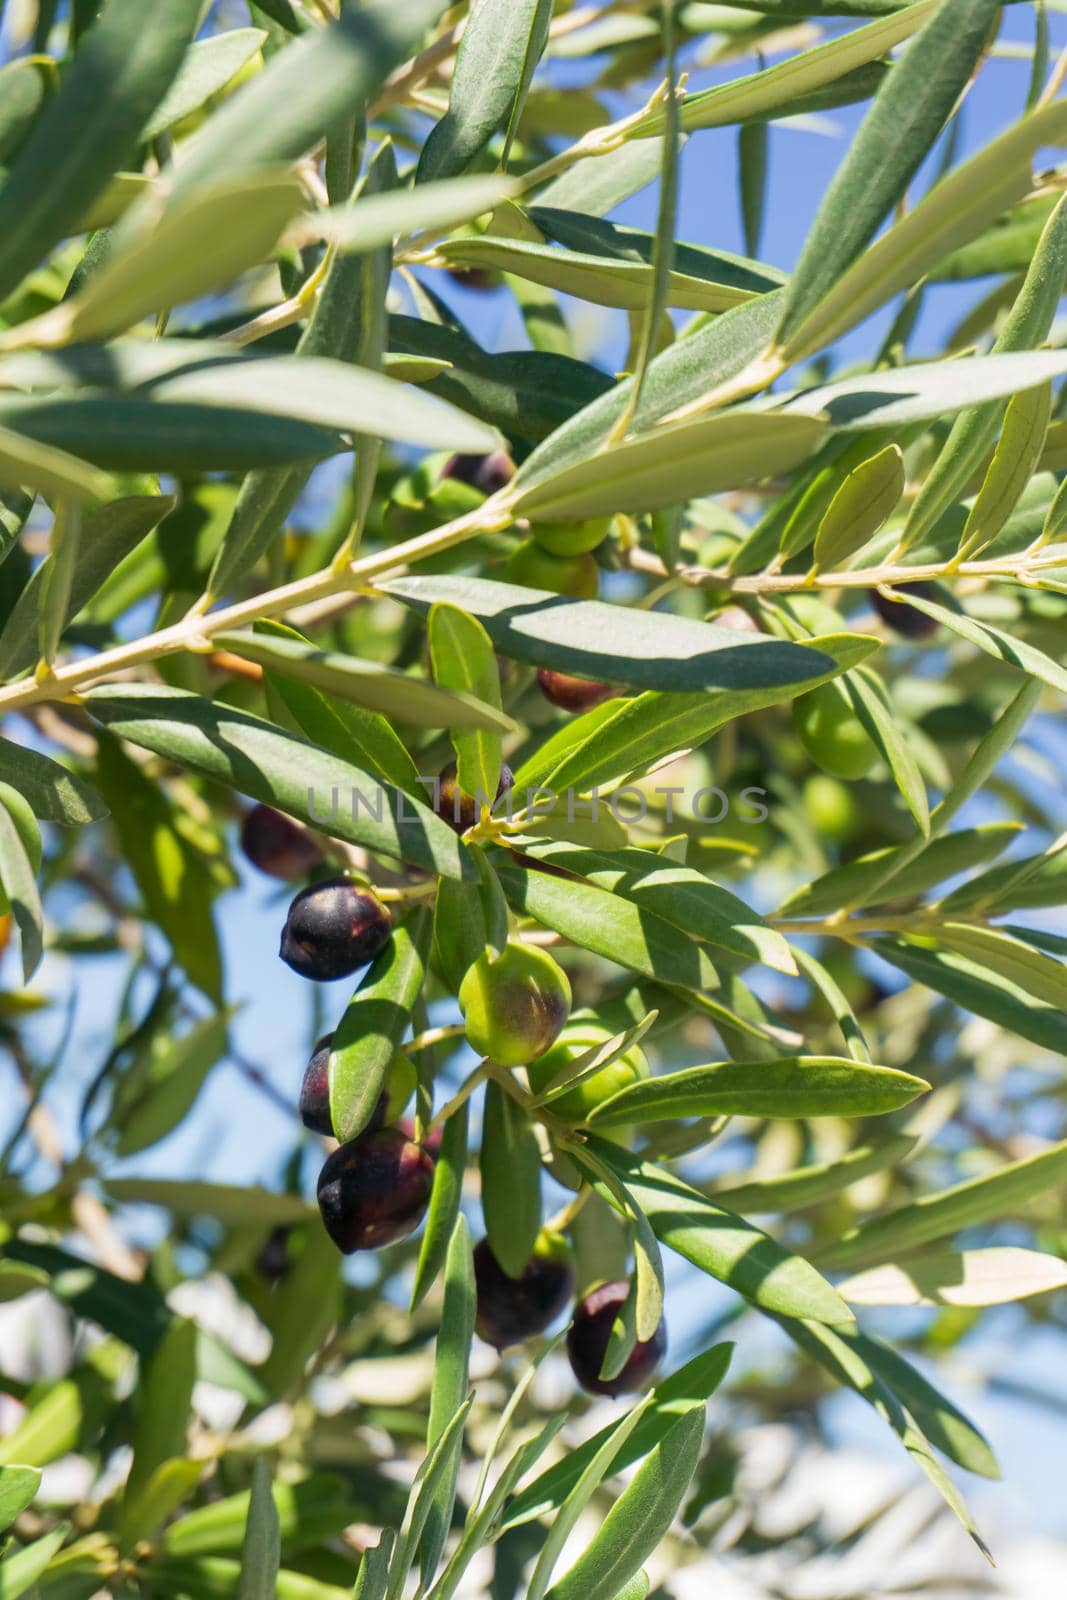 Olives ripening on a branch in an olive grove close up